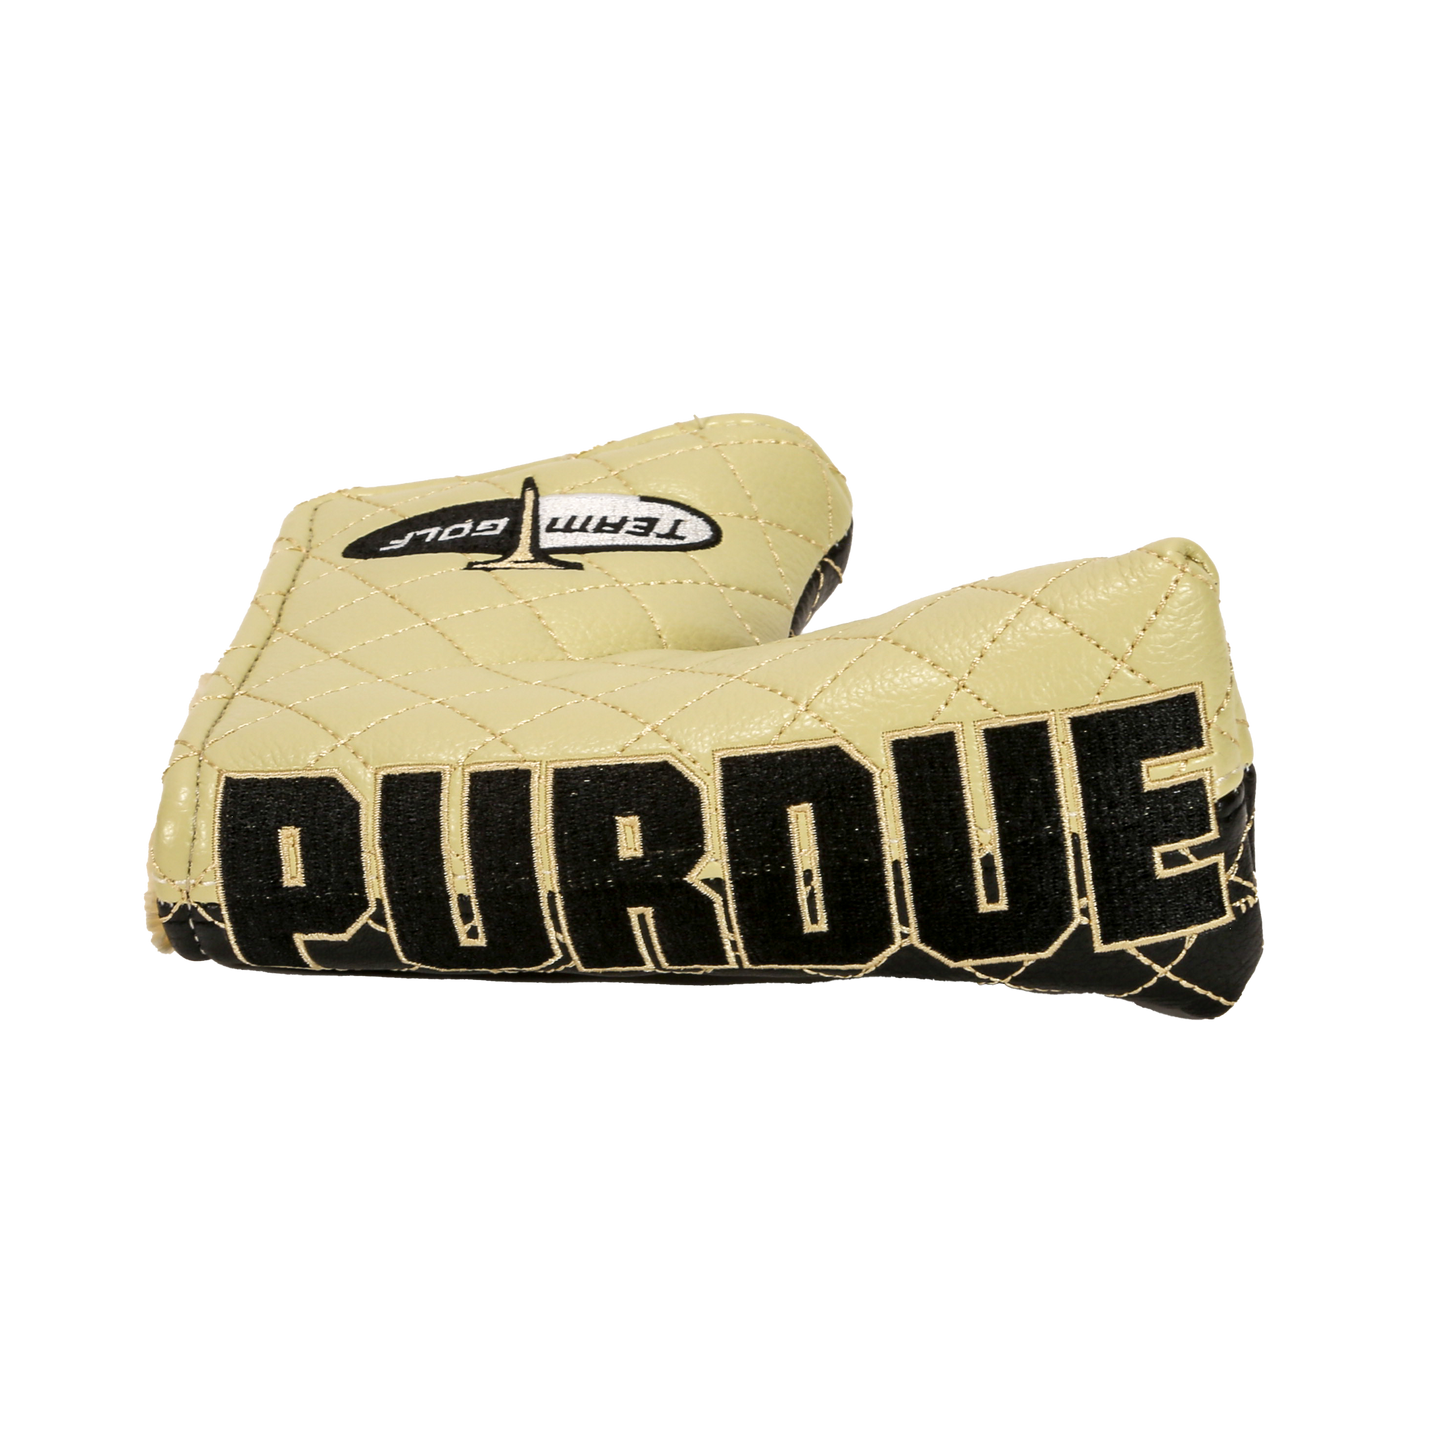 Purdue Blade Putter Cover